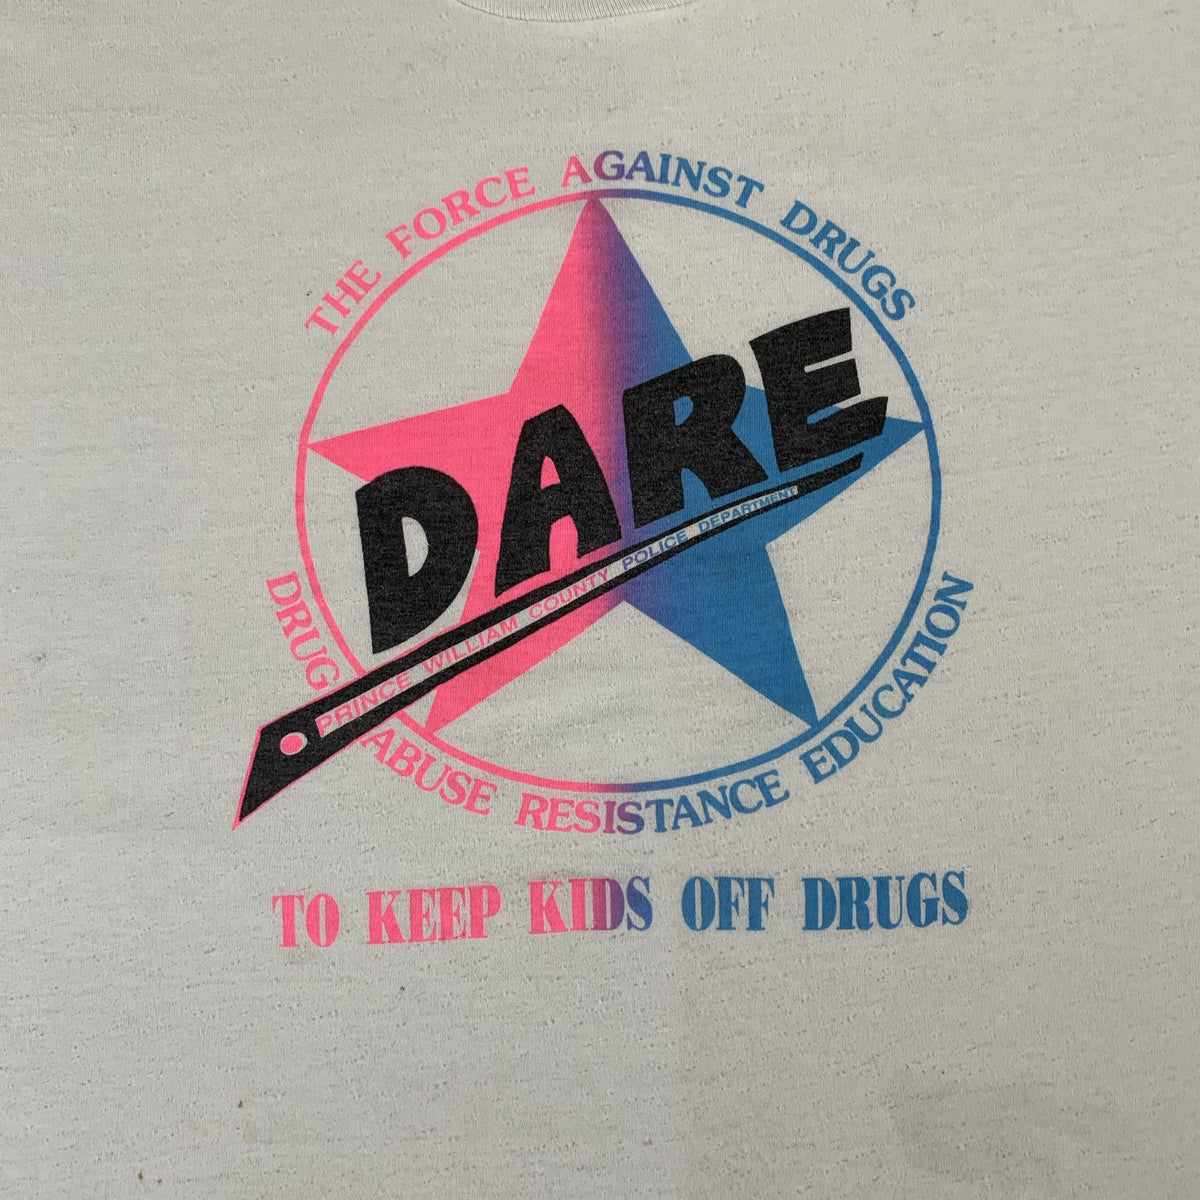 Vintage Dare “The Force Against Drugs” T-Shirt - jointcustodydc